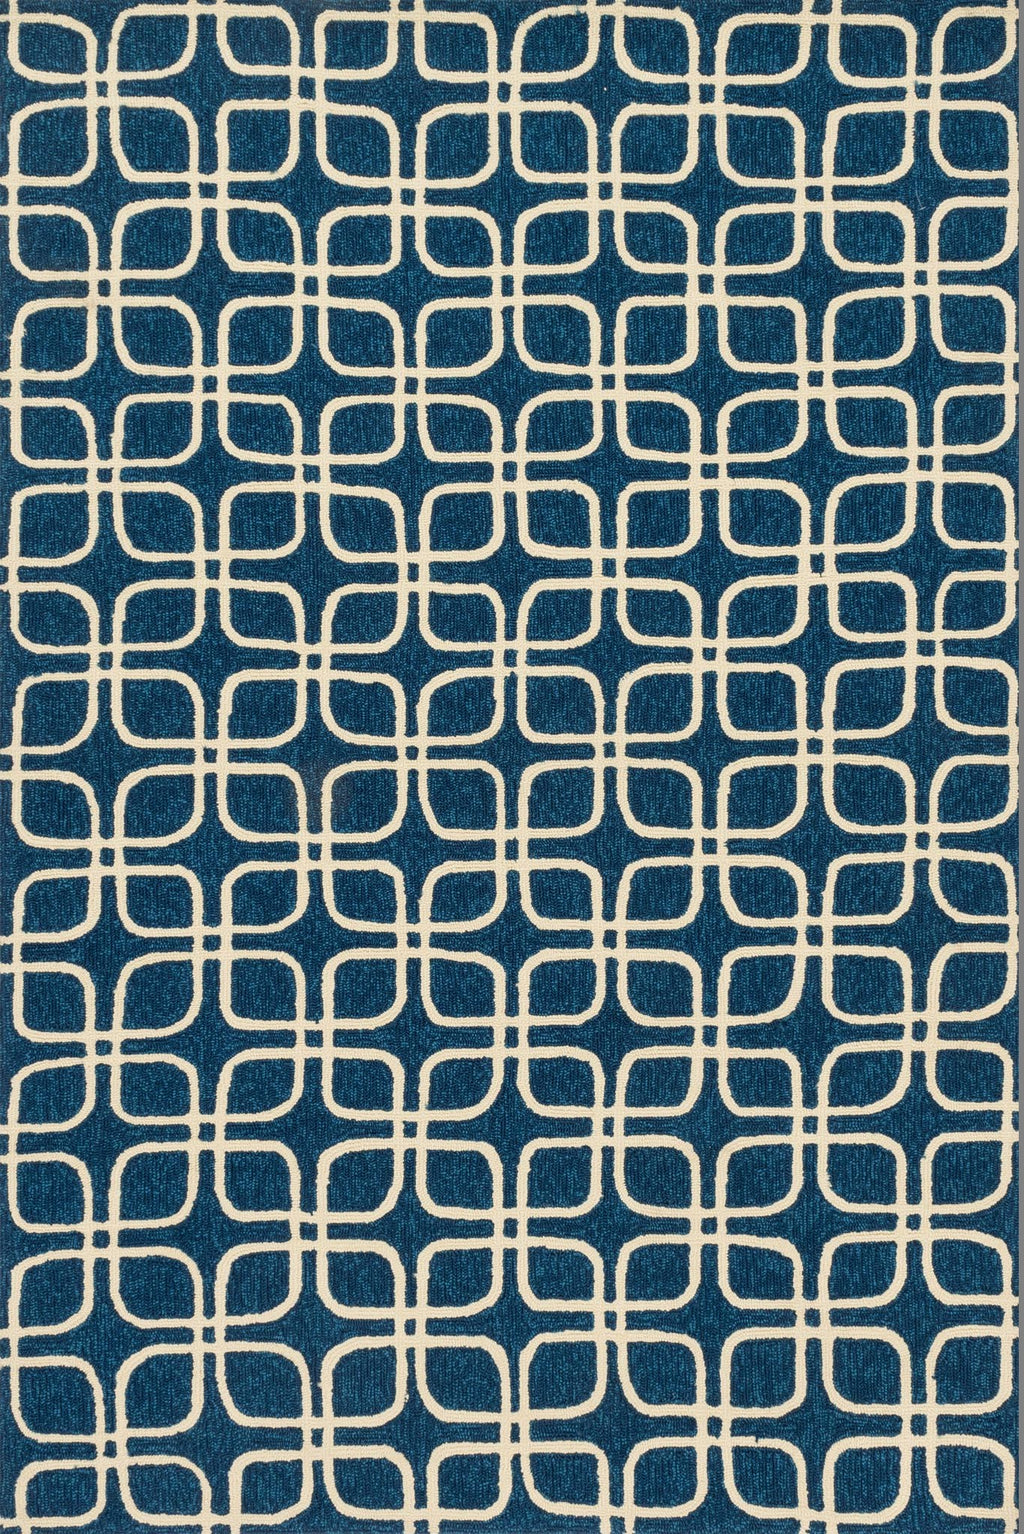 VENICE BEACH Collection Rug  in  BLUE / IVORY Blue Small Hand-Hooked Polypropylene